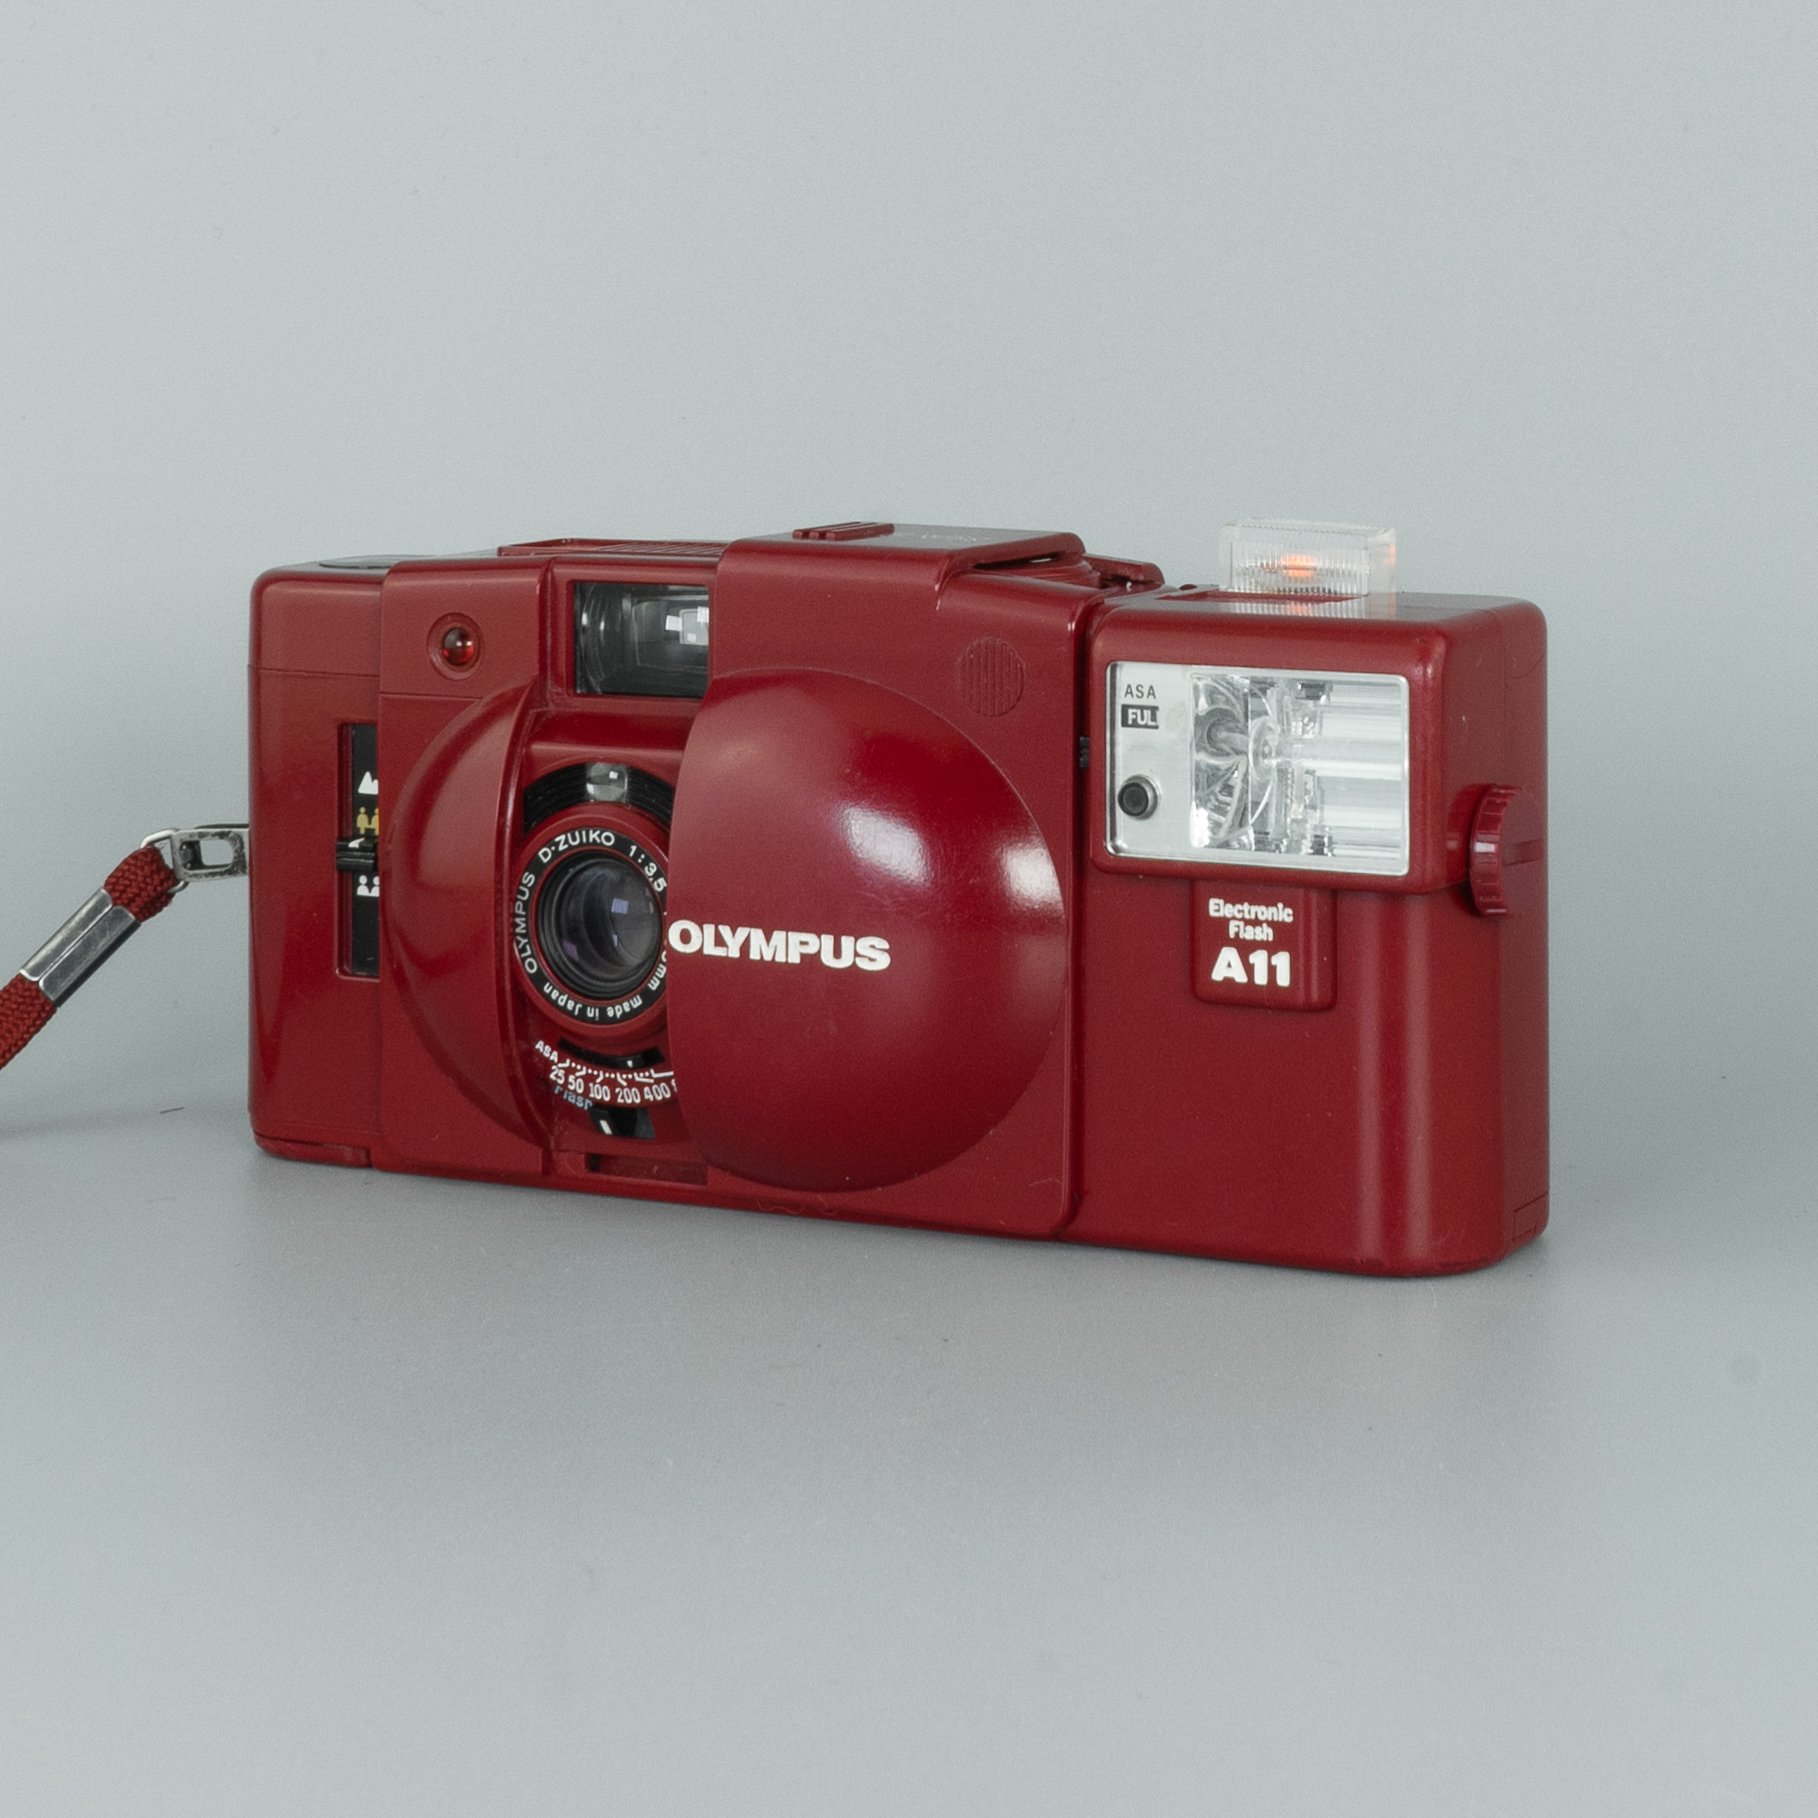 Olympus XA2 (Limited 'Heart Red' Edition) with A11 Flash — LensFayre